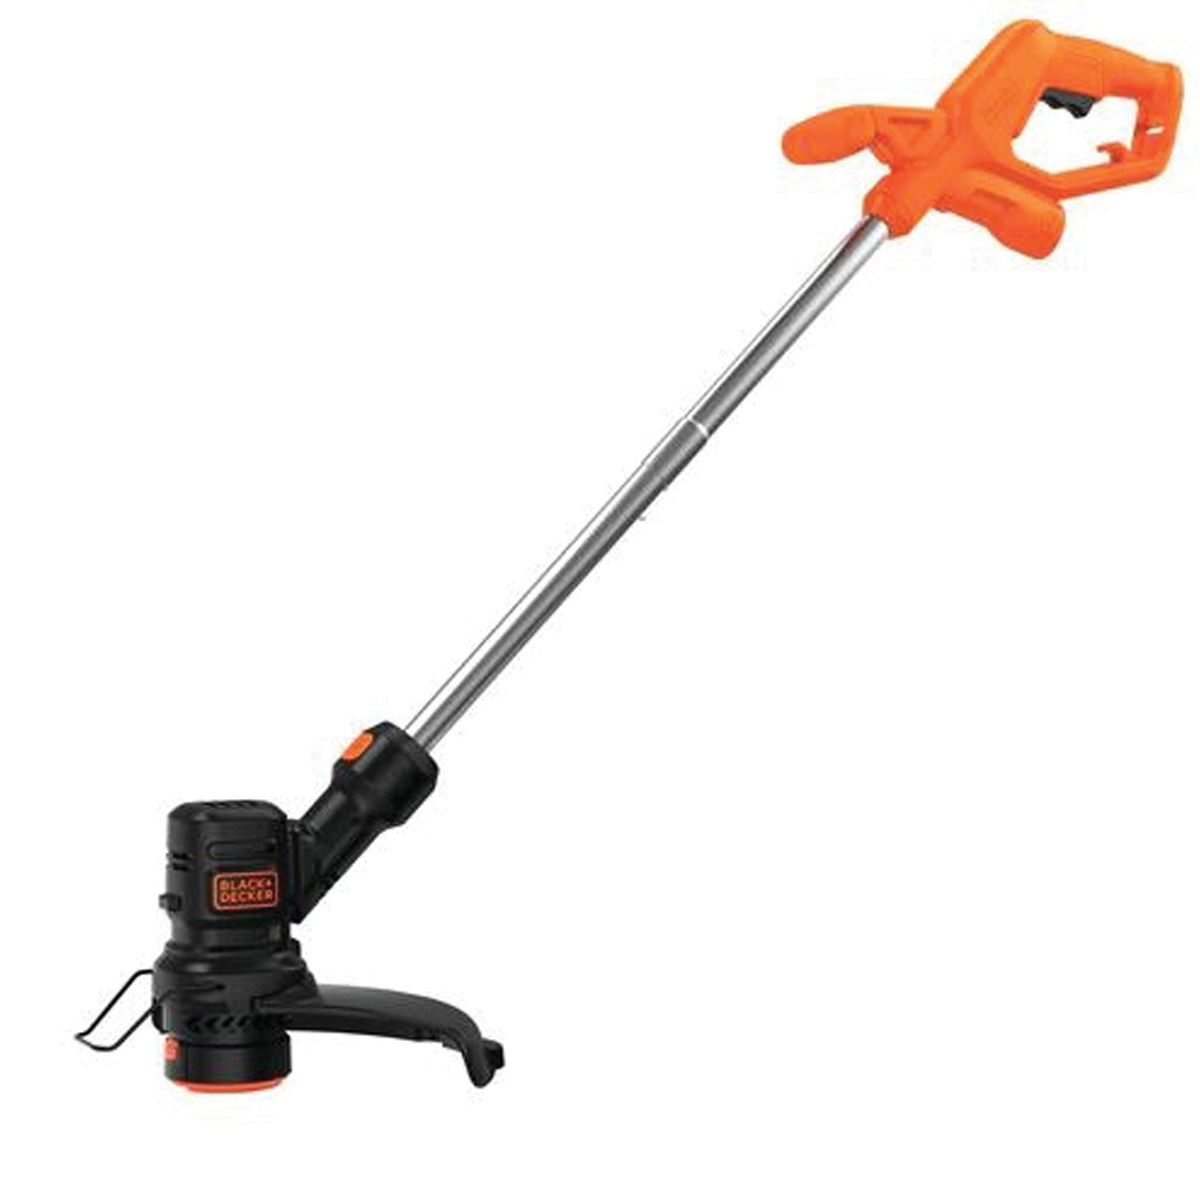 BEST935 Electric String Trimmer, 4 A